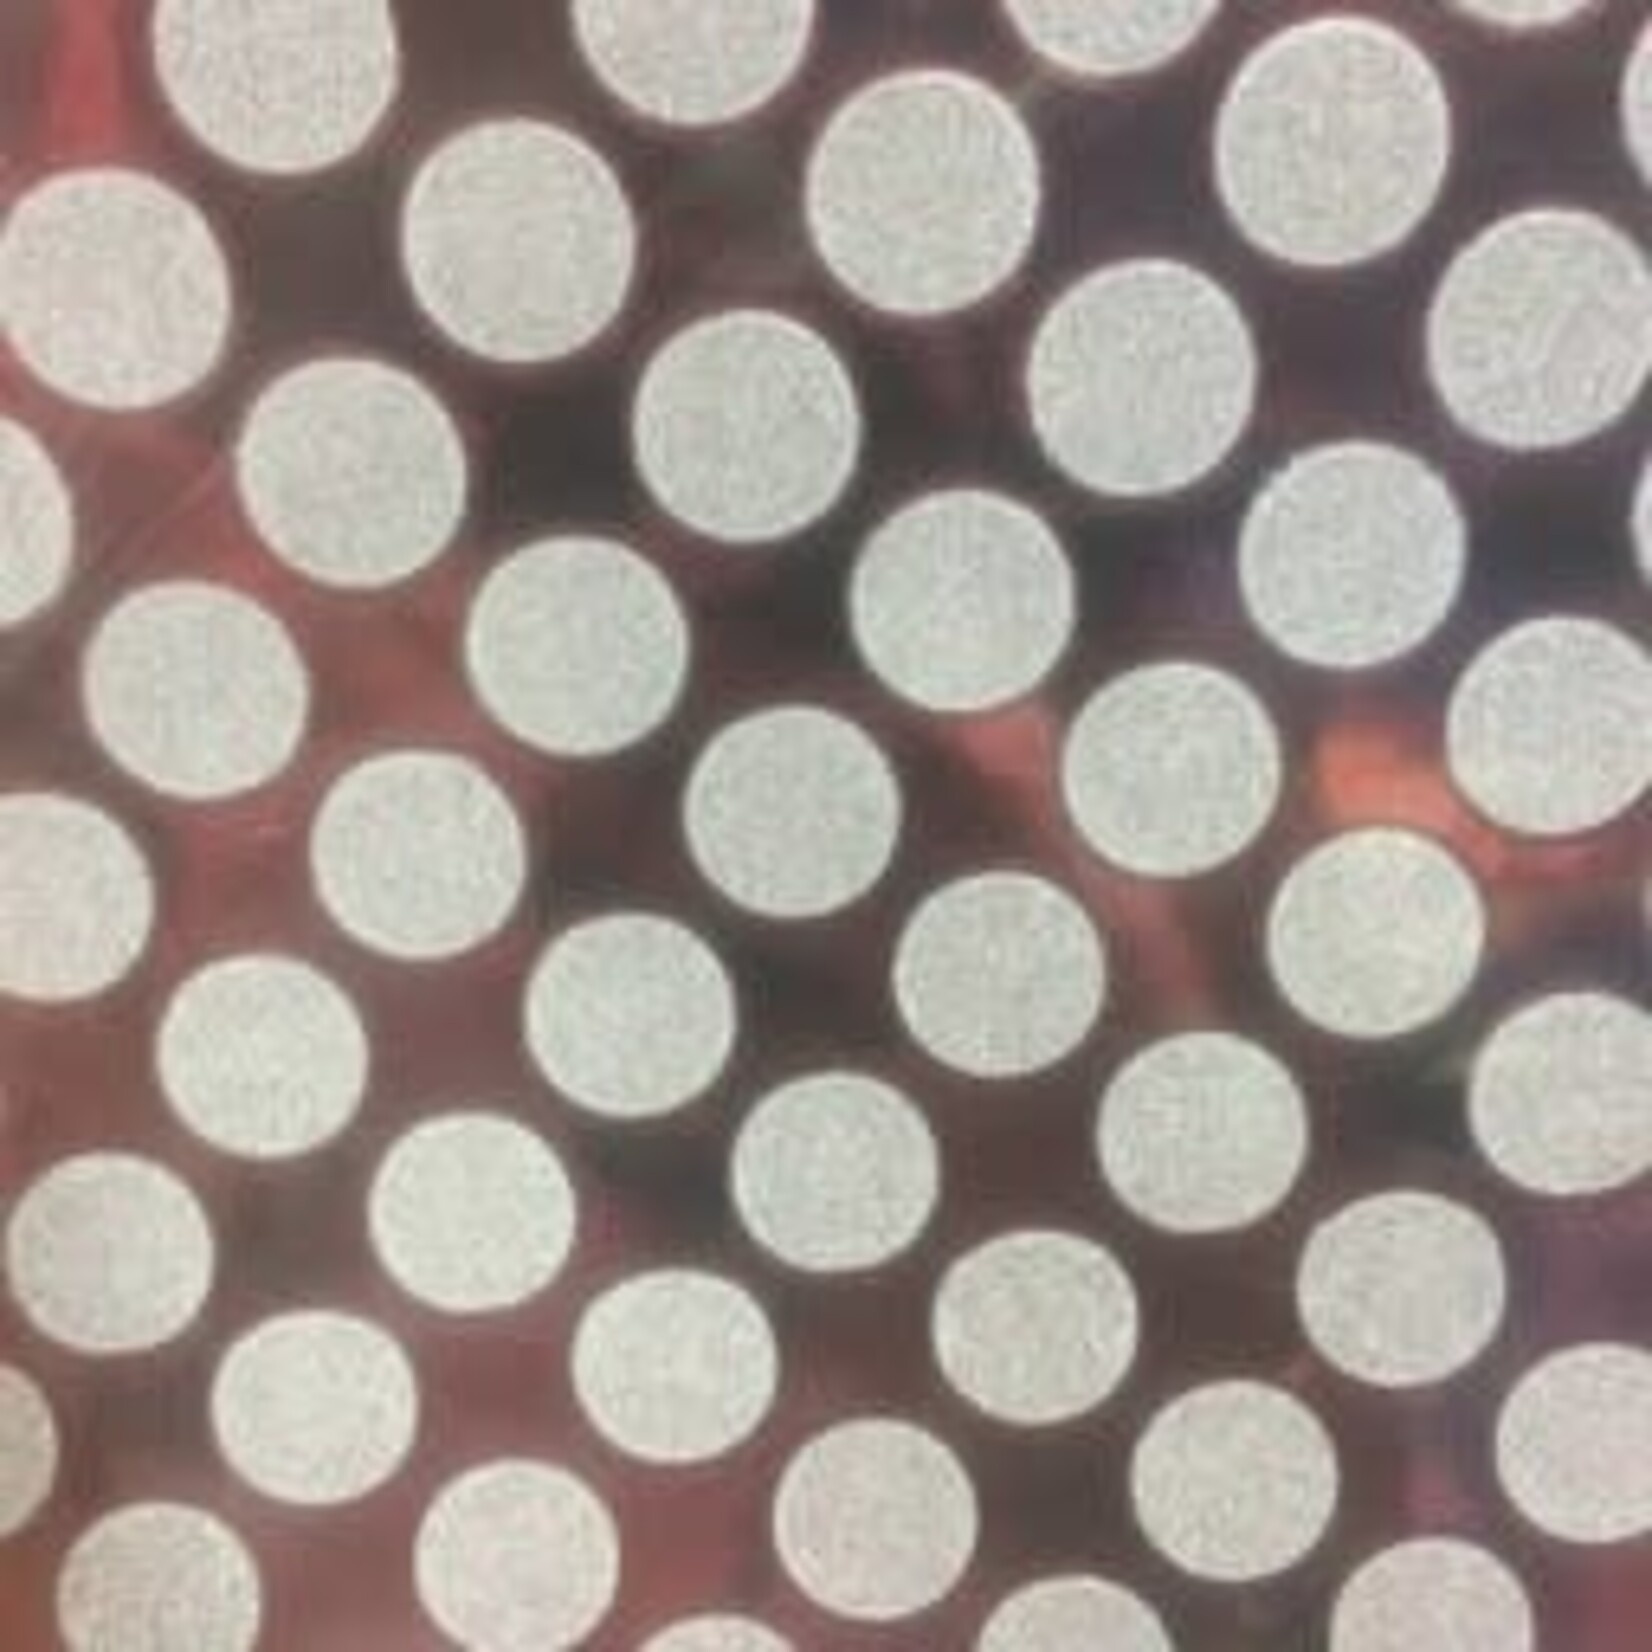 Glitter Paper Dots Style Non-Adhesive (5 Sheets) Red